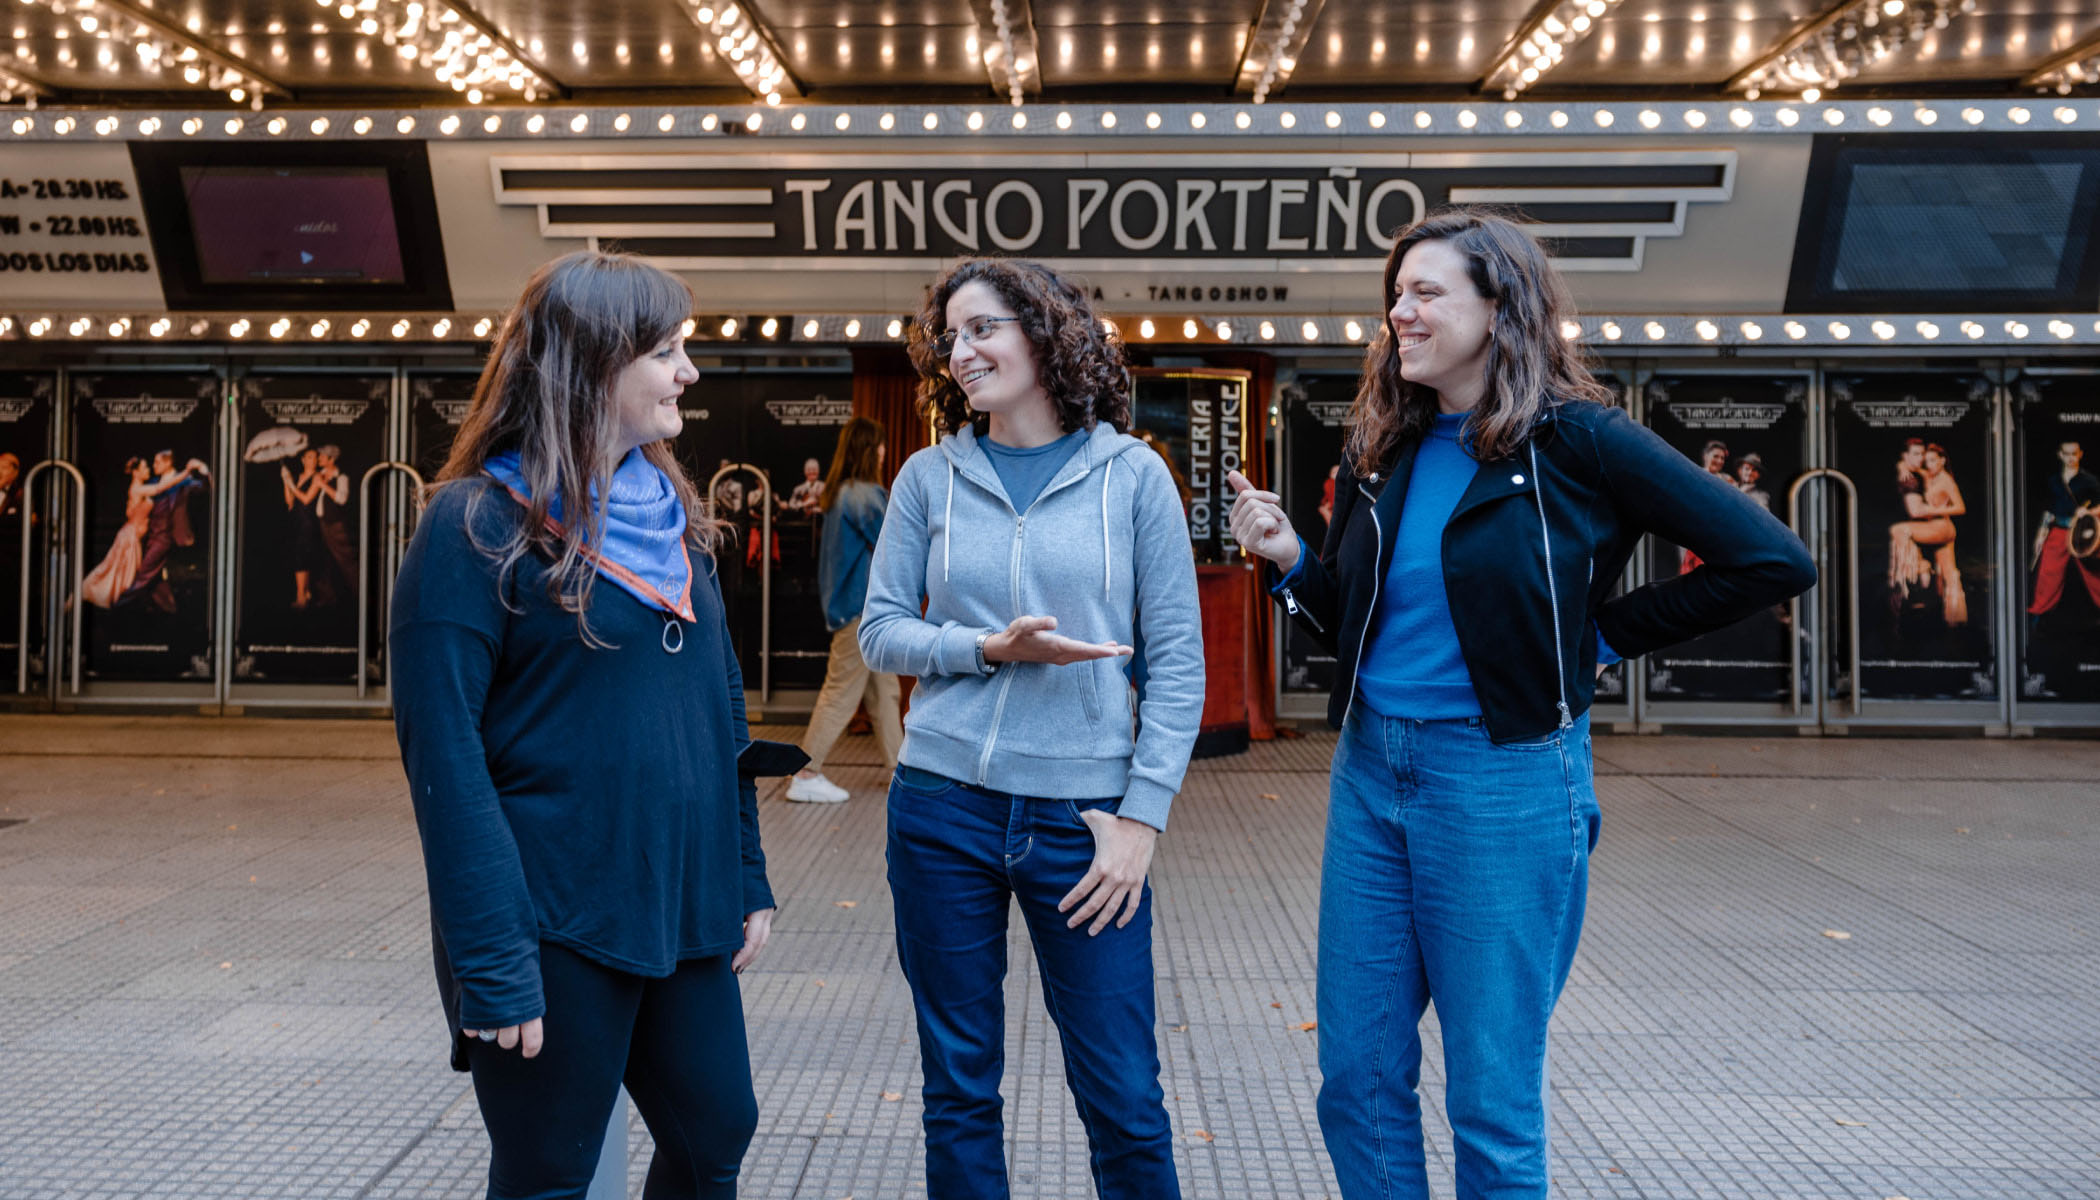 Three people have a conversation in front of a building that says, “Tango Porteño.”